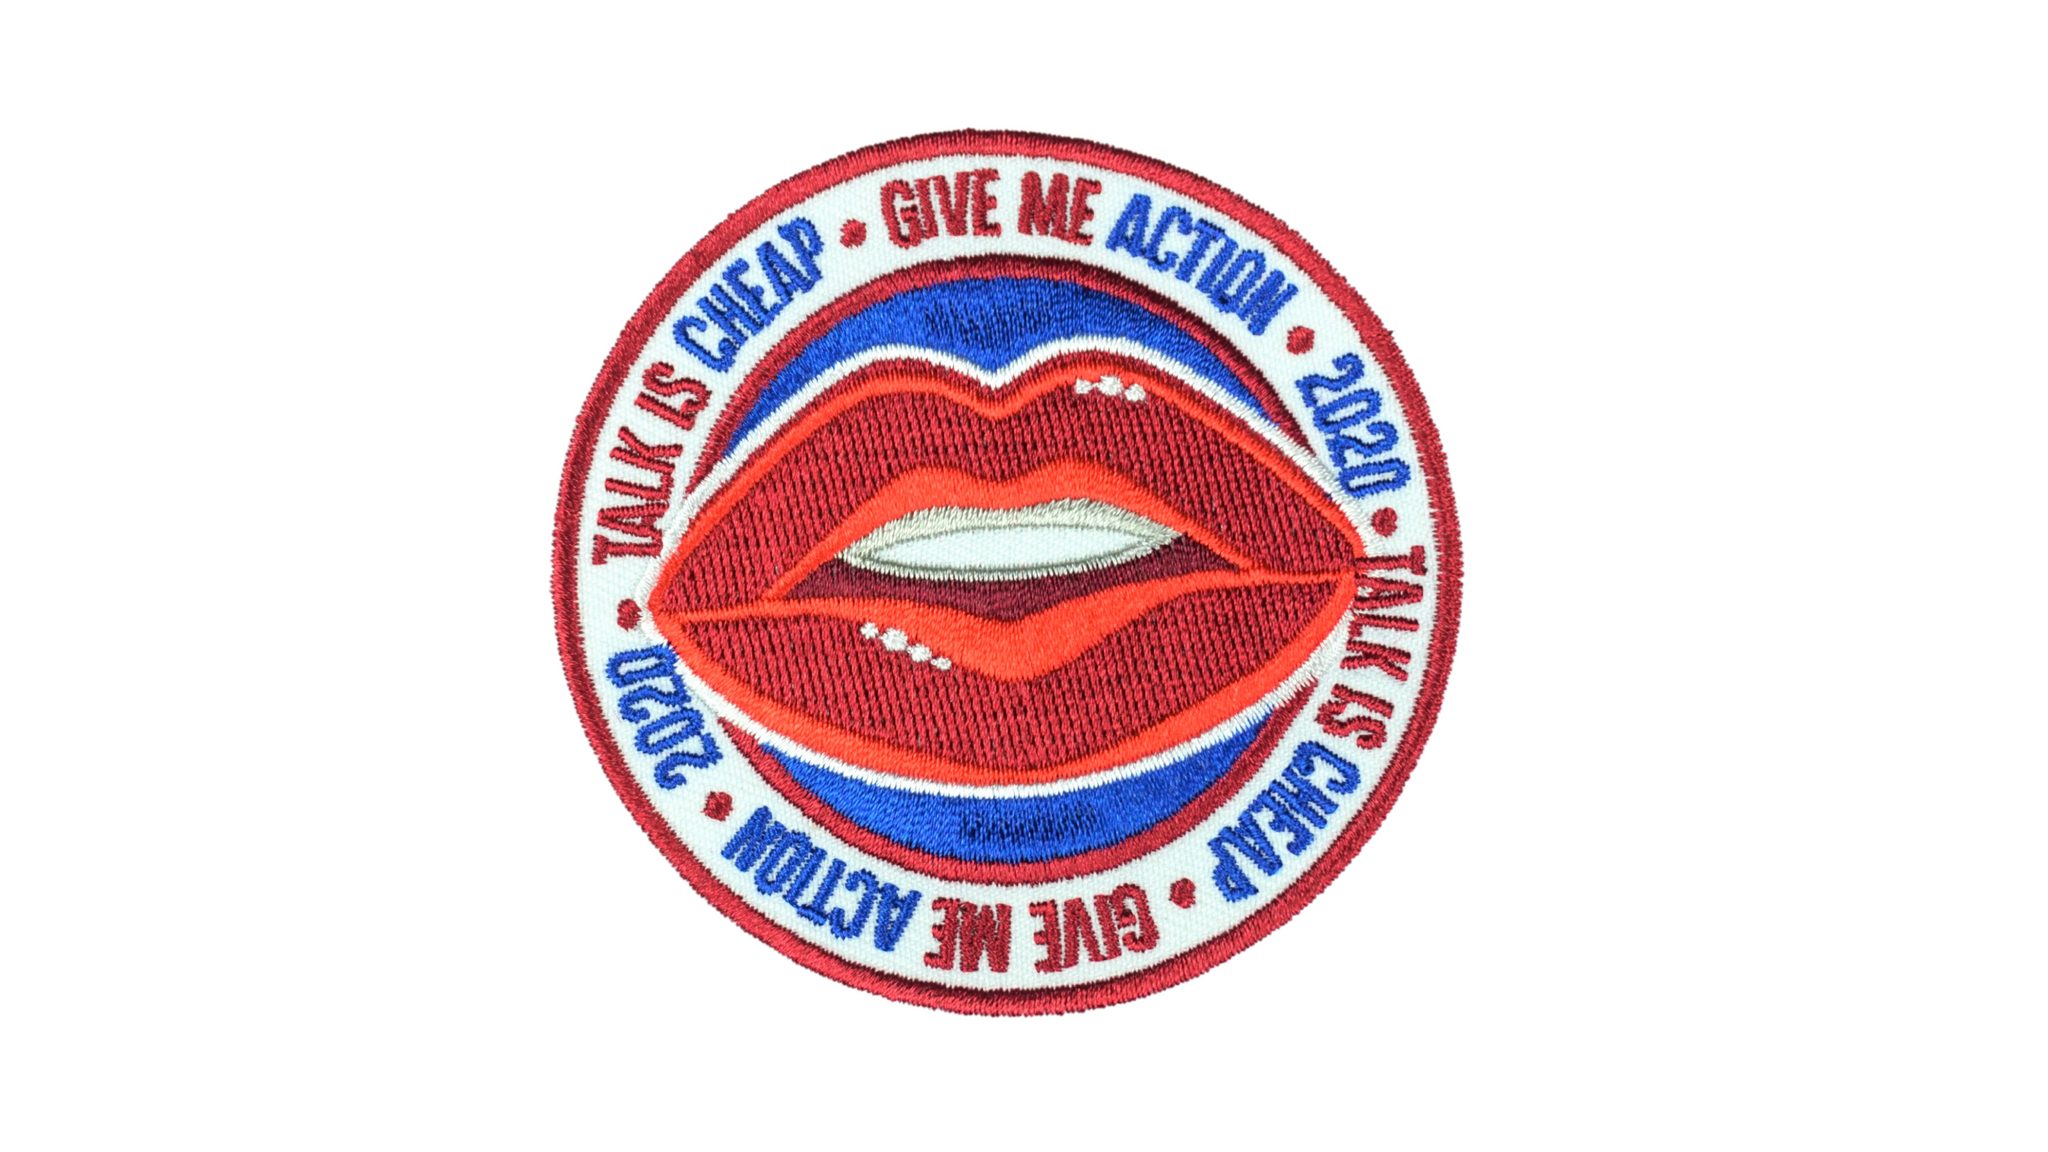 3" embroidered circle shape sew-on patch in red, white blue. Red lips in center of patch, with text around the edge reading Give Me Action, Talk is Cheap, 2020